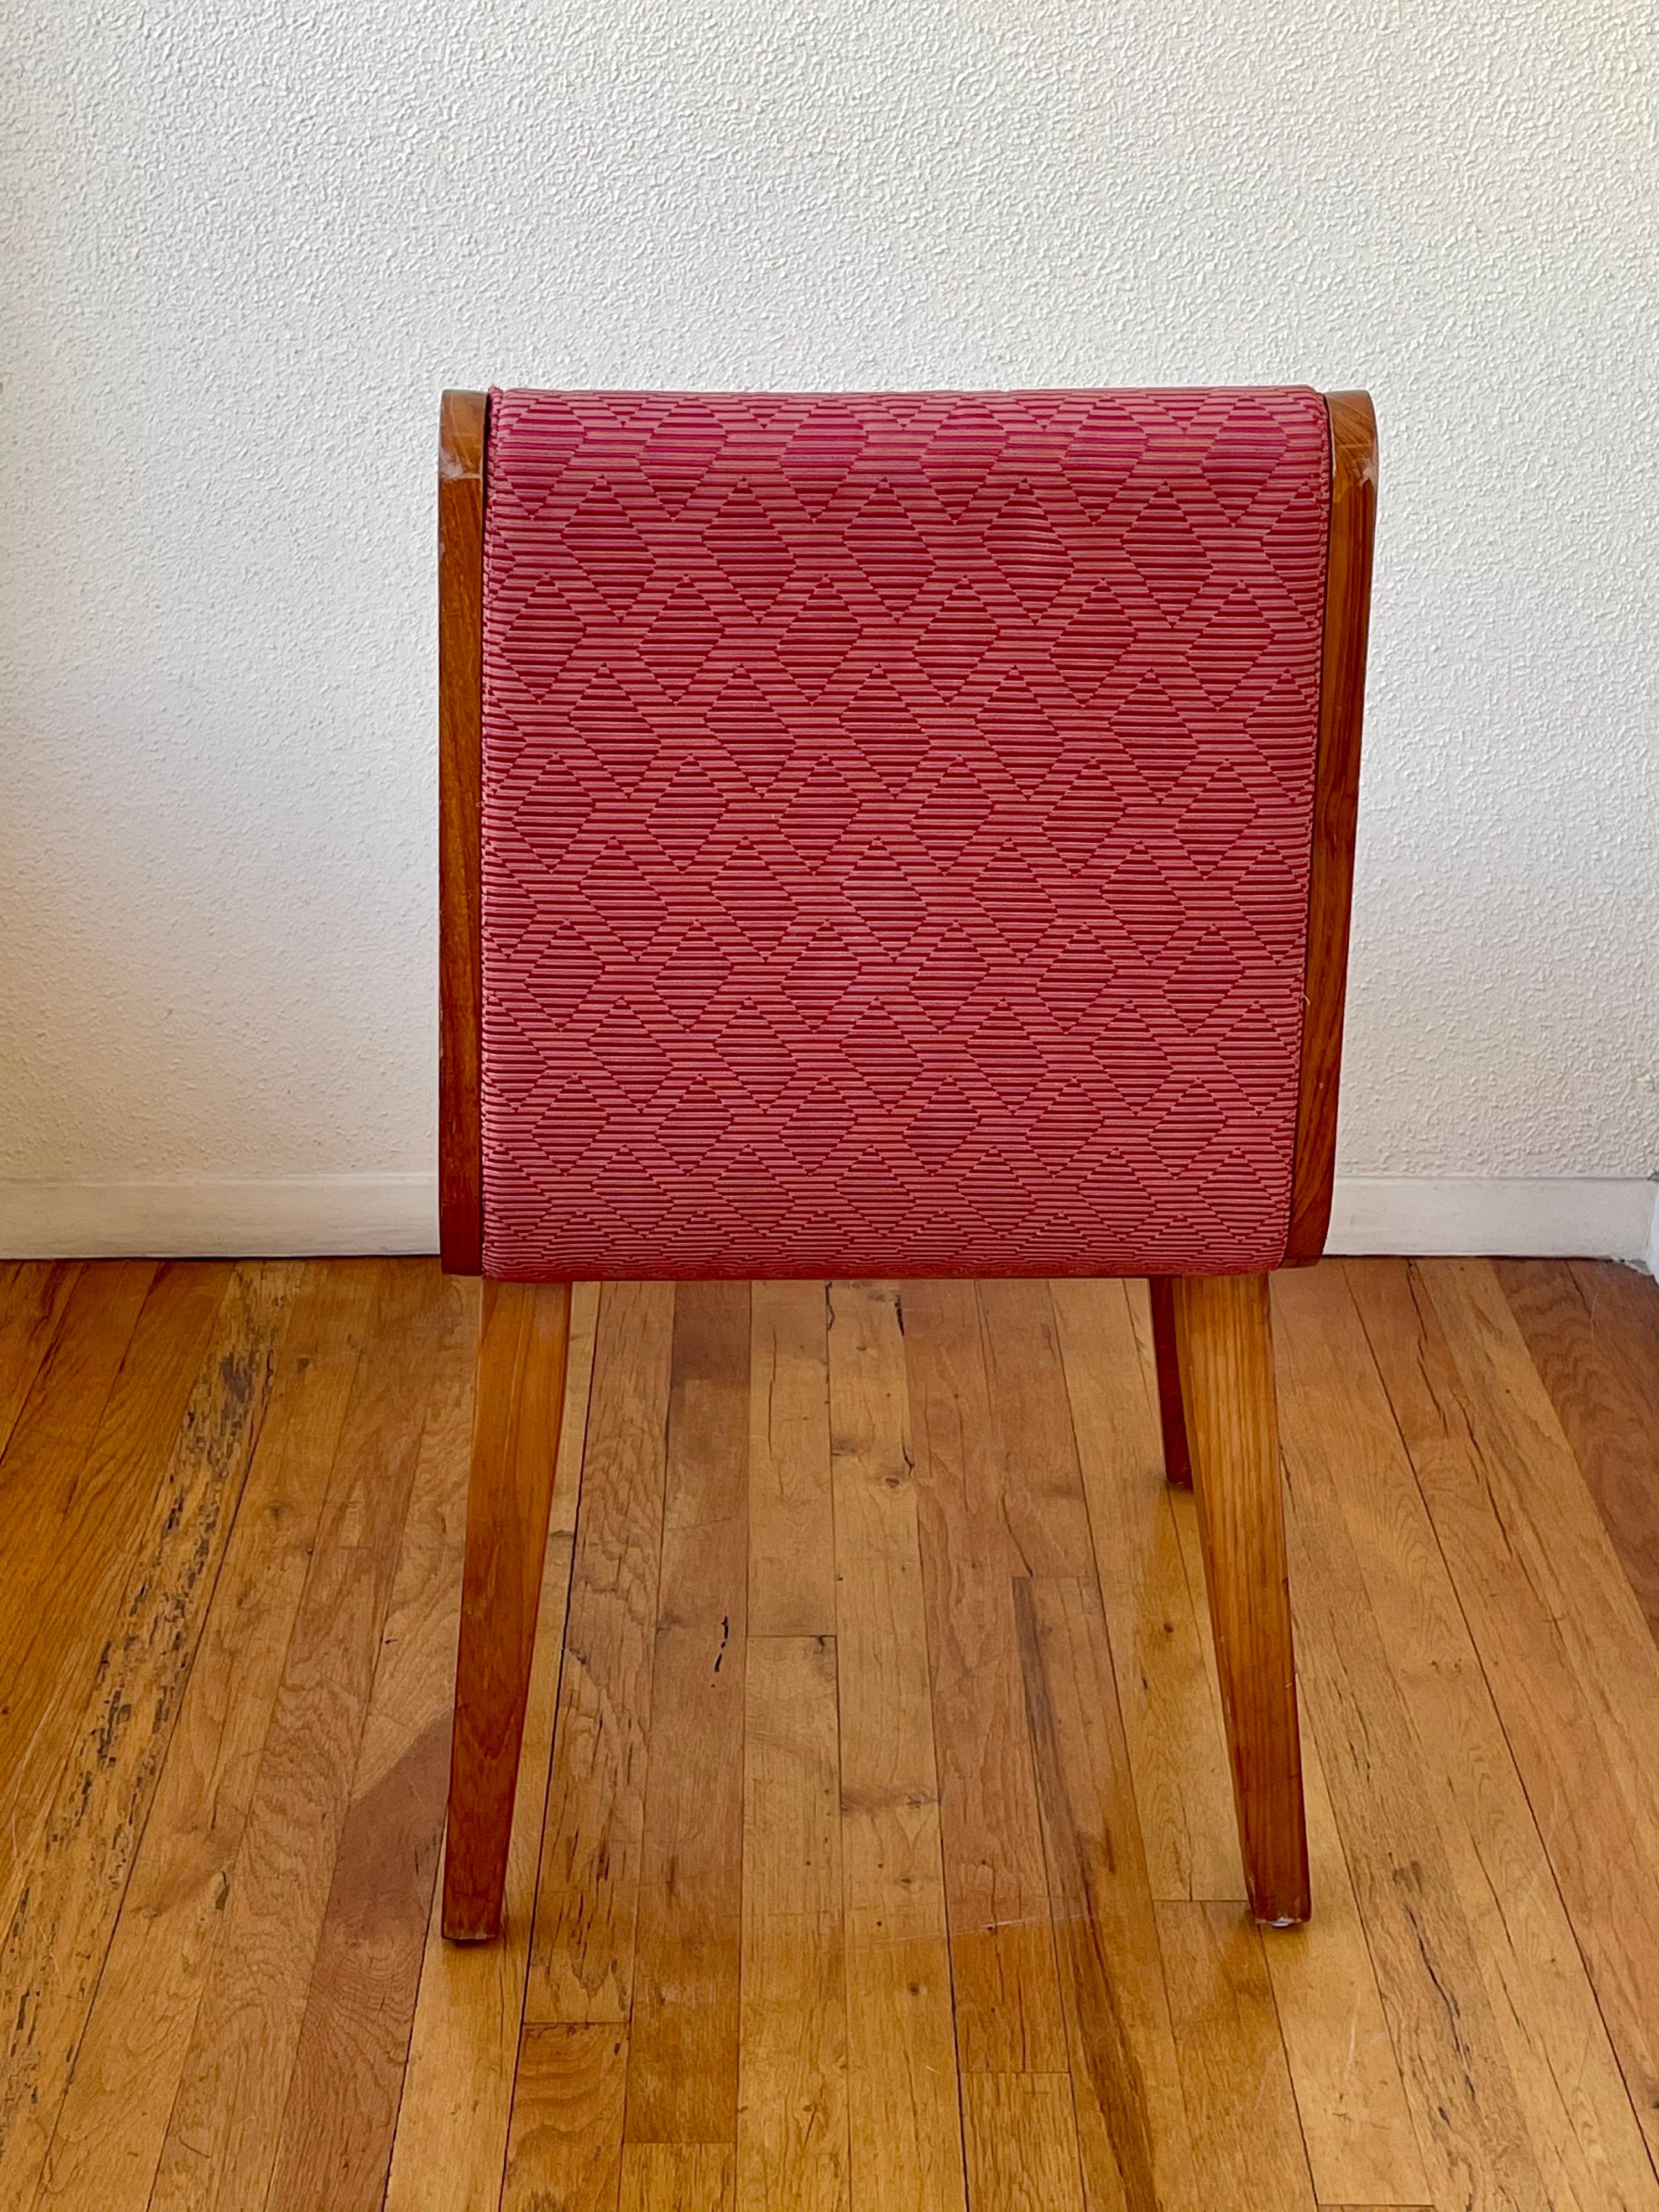 Well constructed single chair upholstered in its original material and condition, solid and sturdy solid walnut frame, circa 1950s.